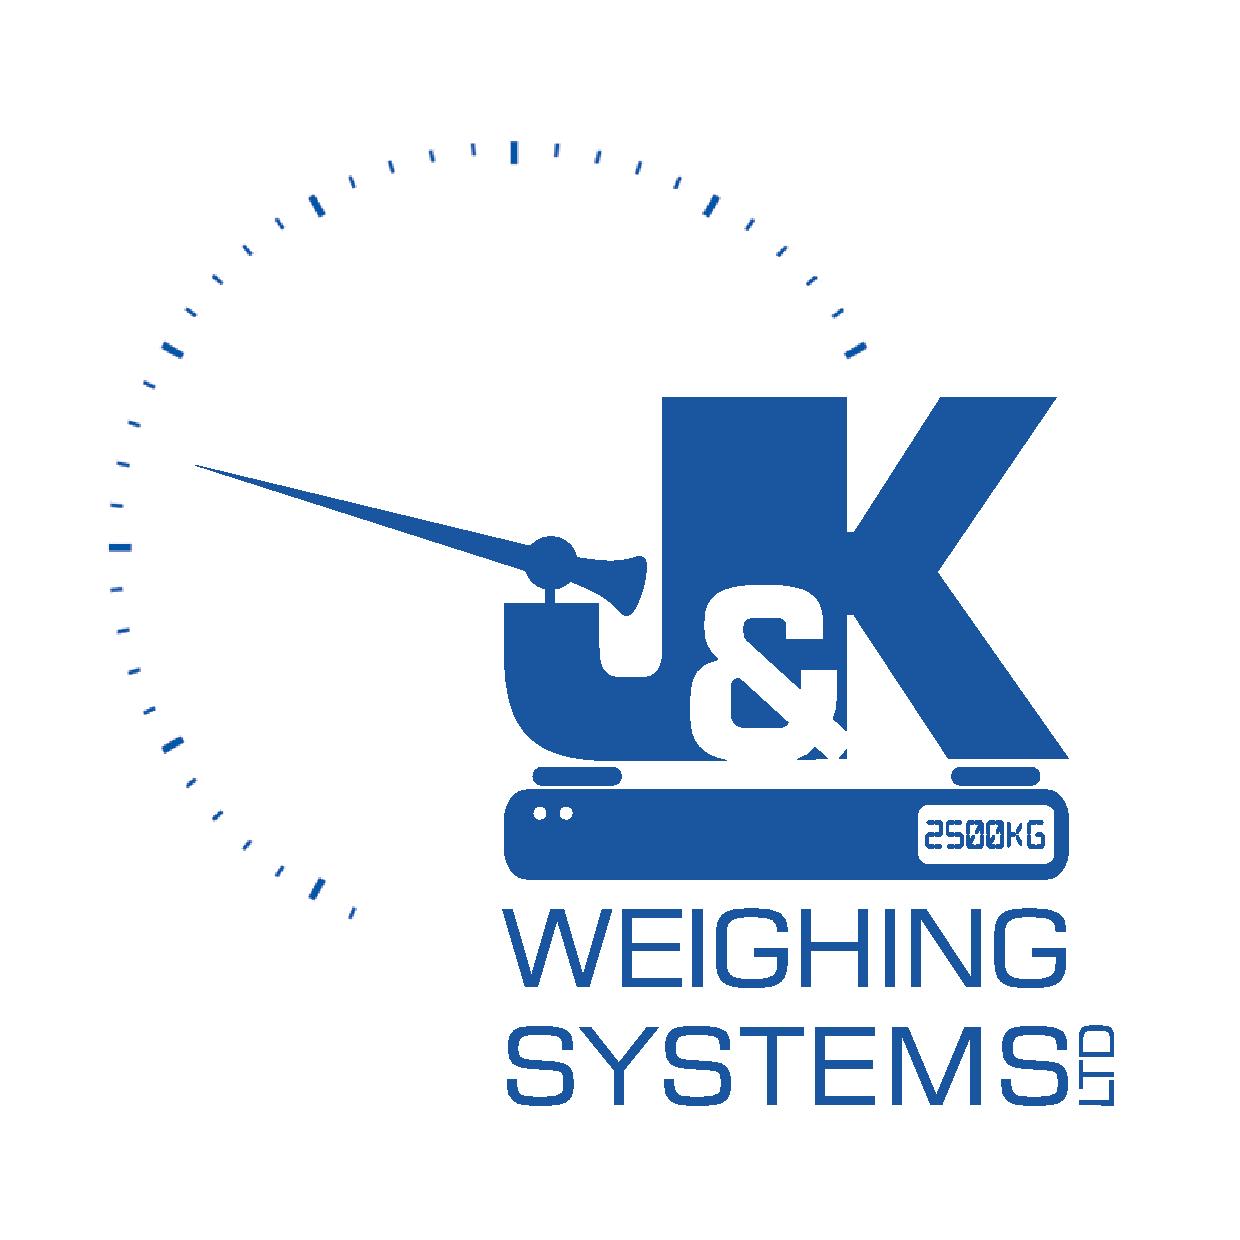 J & K Weighing Systems Ltd